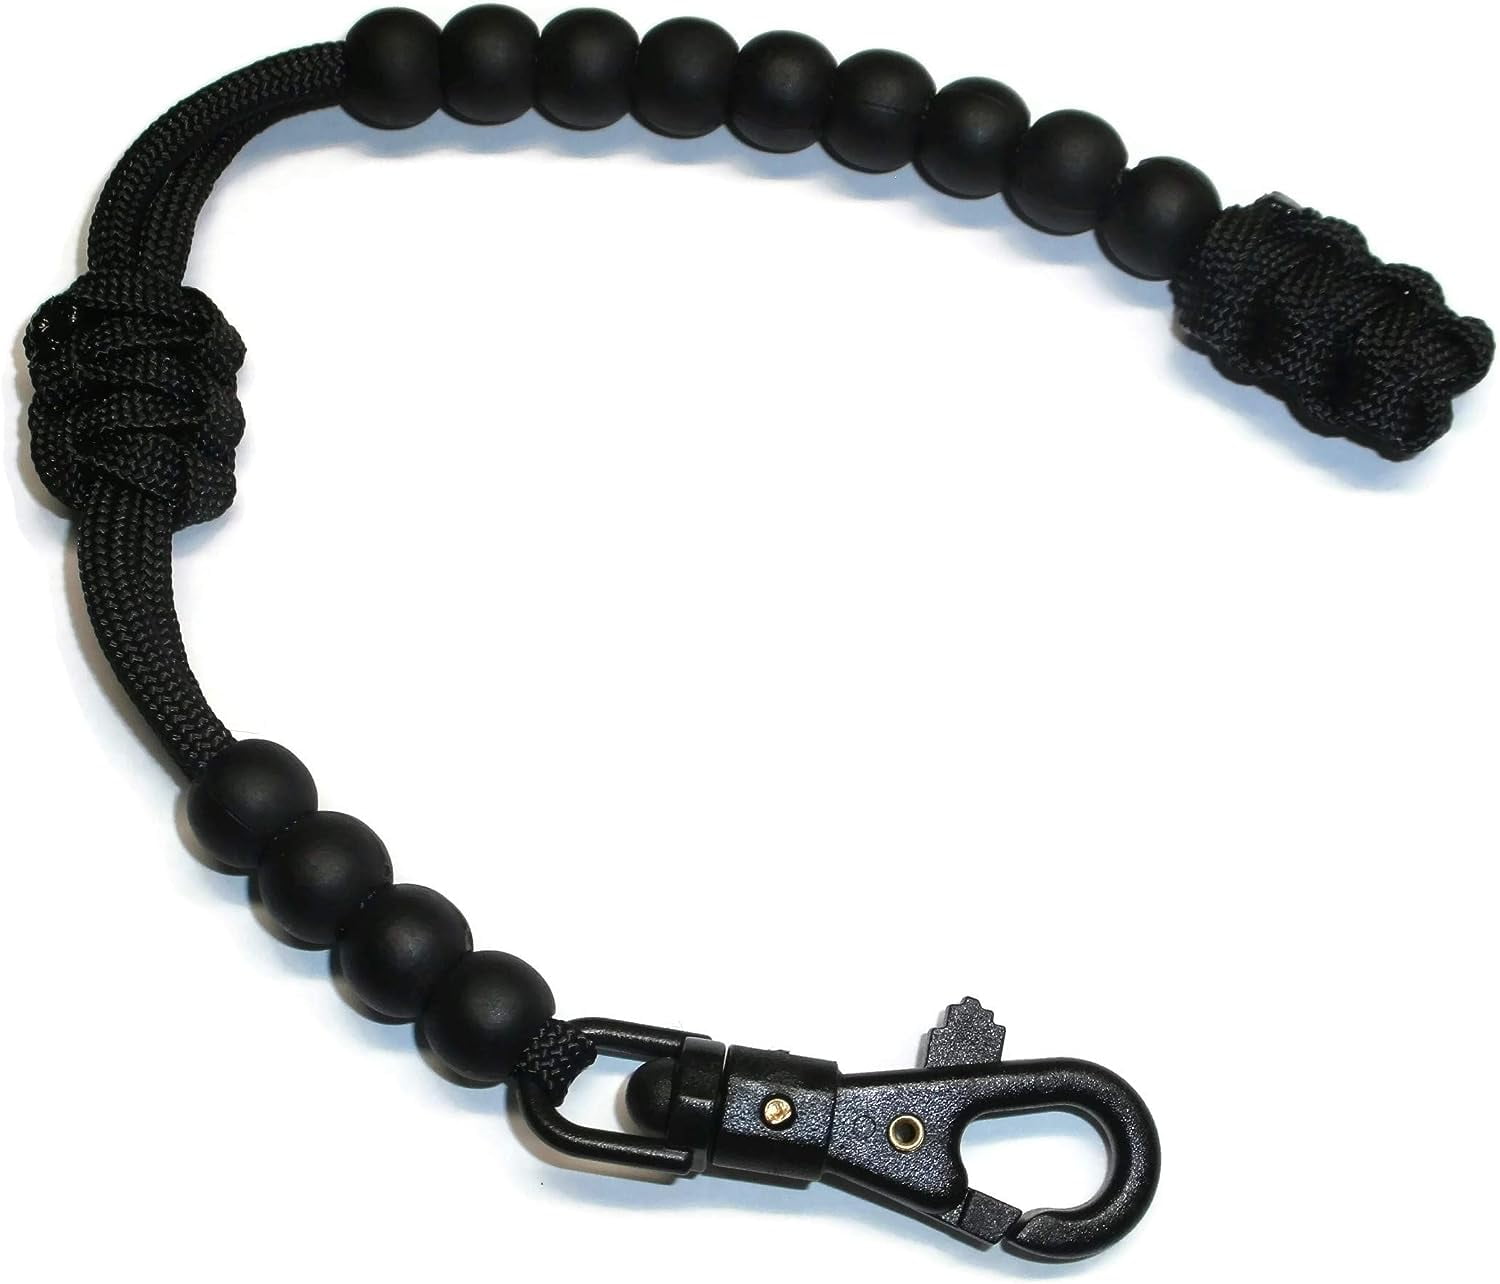 Redvex Ranger Pace Counter Beads - 10 inches - ABS Clip - Choose your color  - Customization Available (Desert Camo)